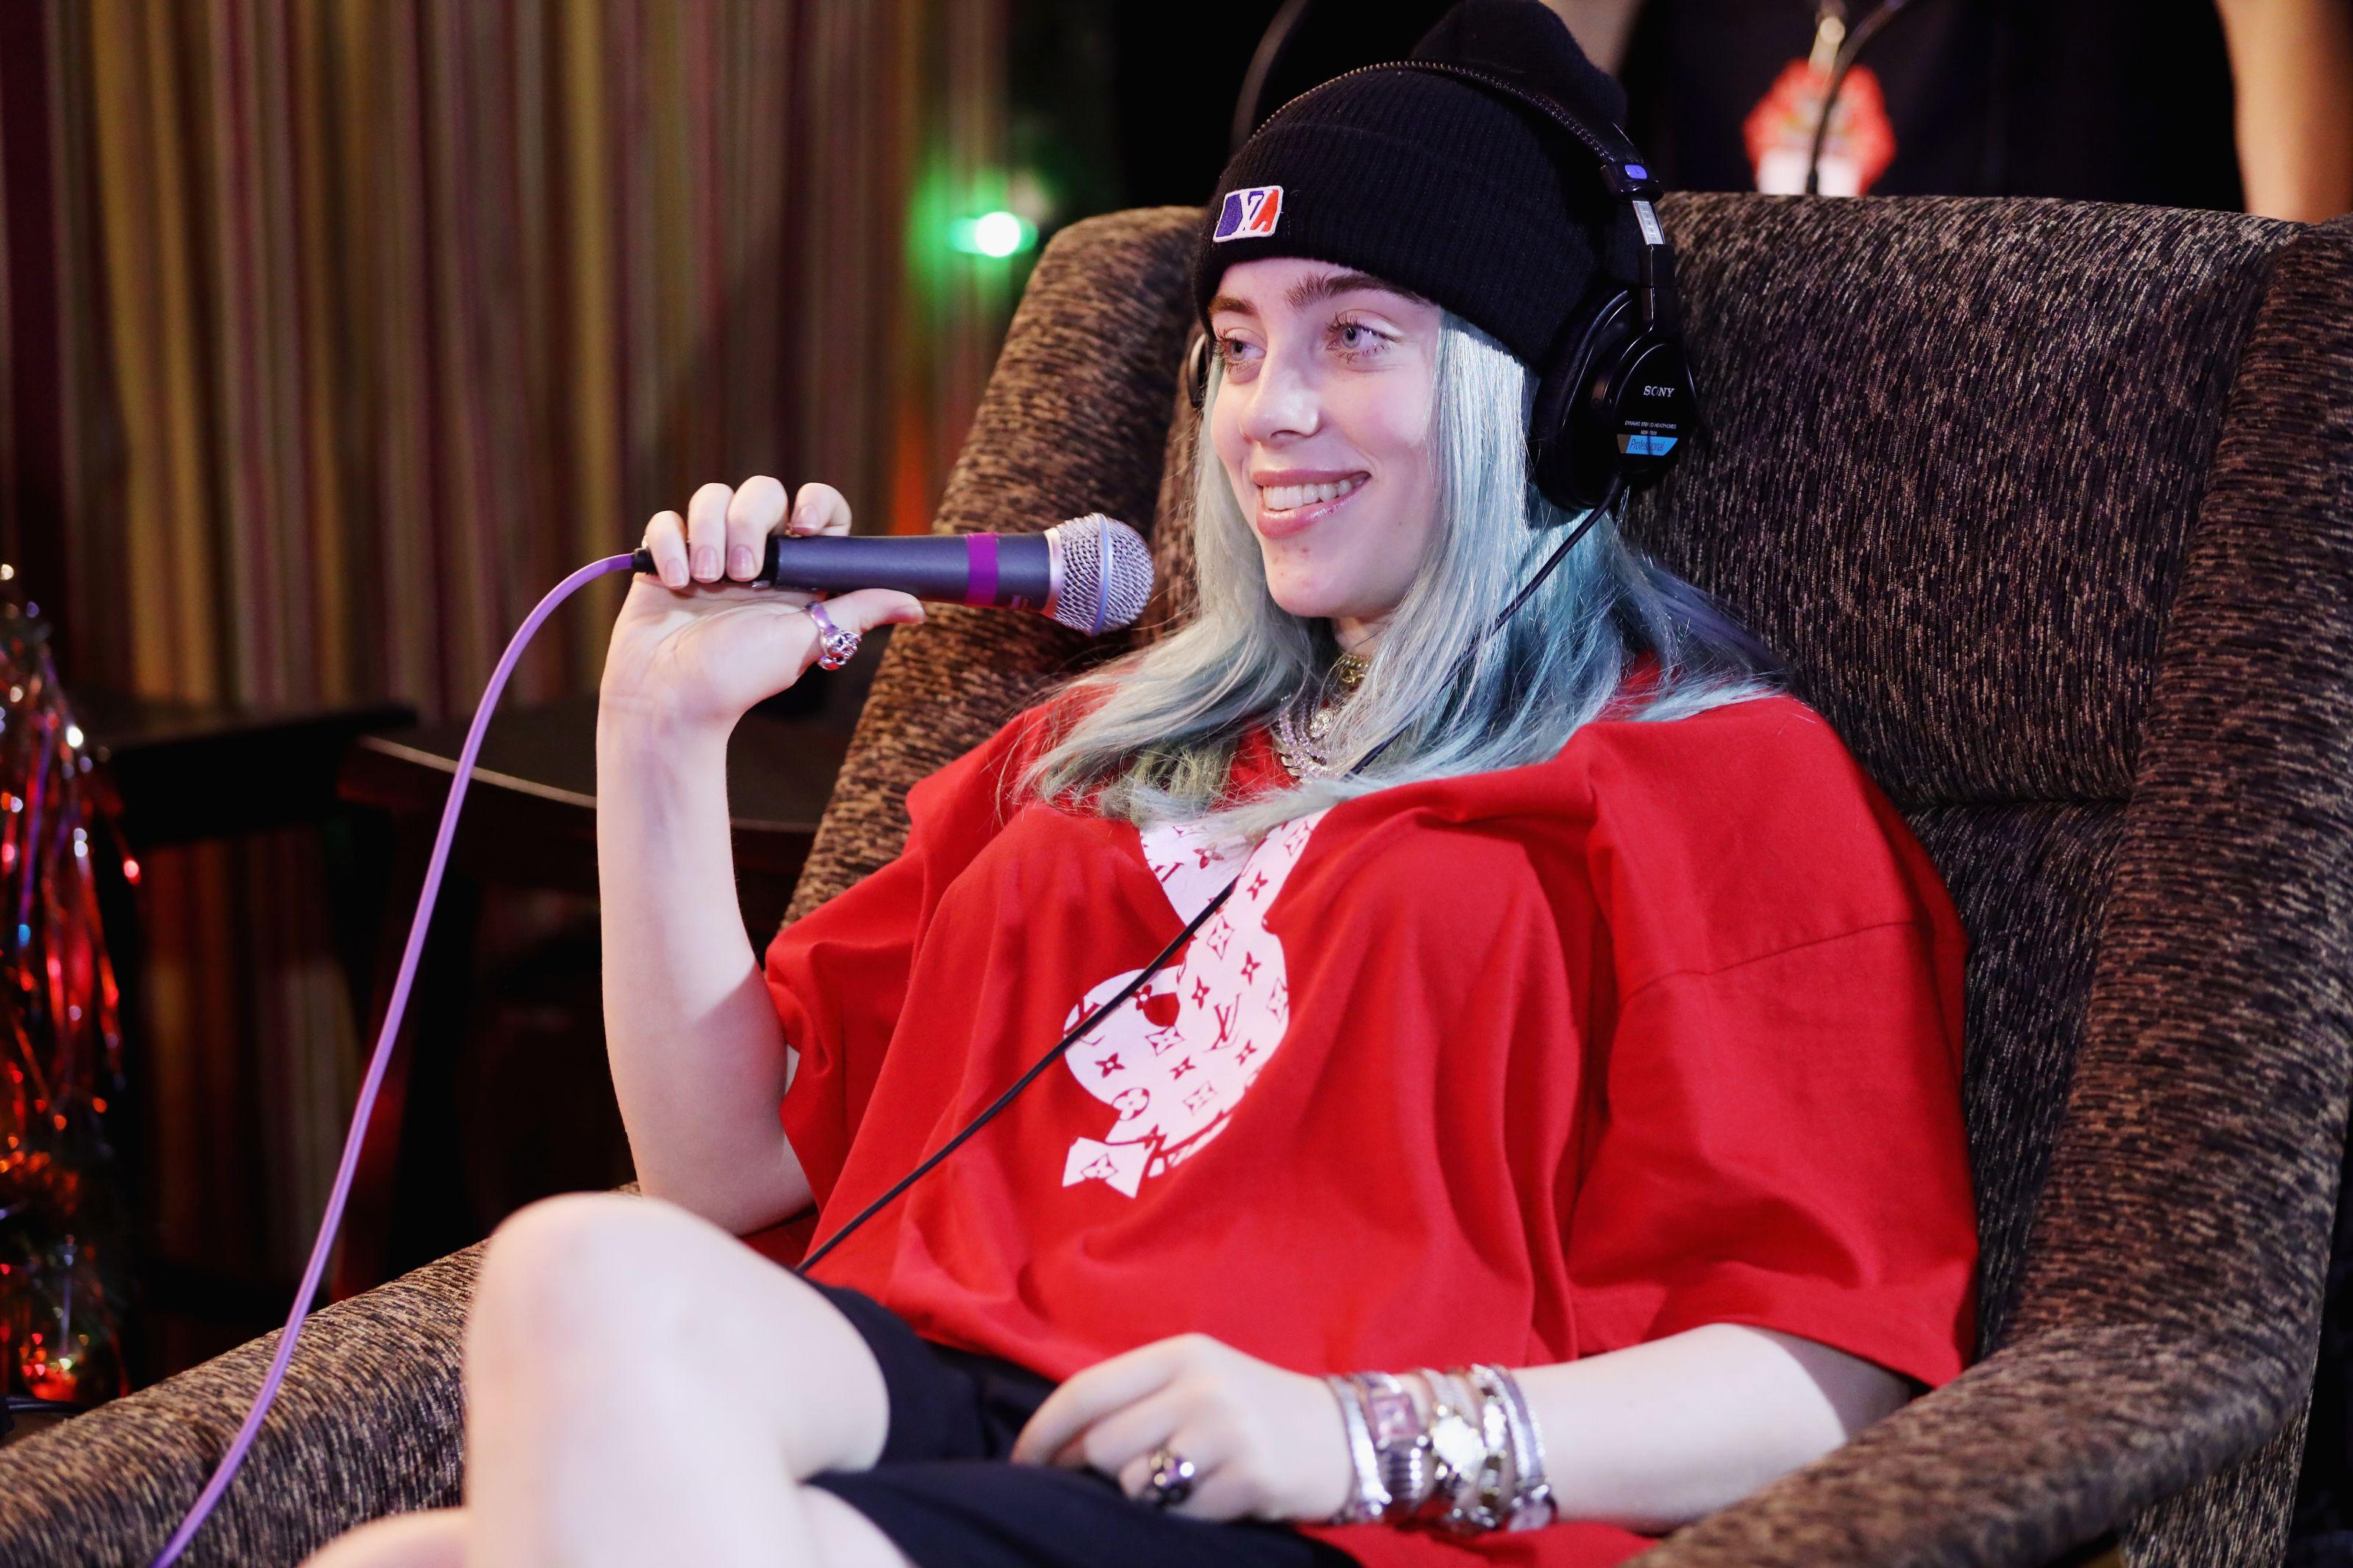 Billie Eilish got to spend time with celebrity pup Doug